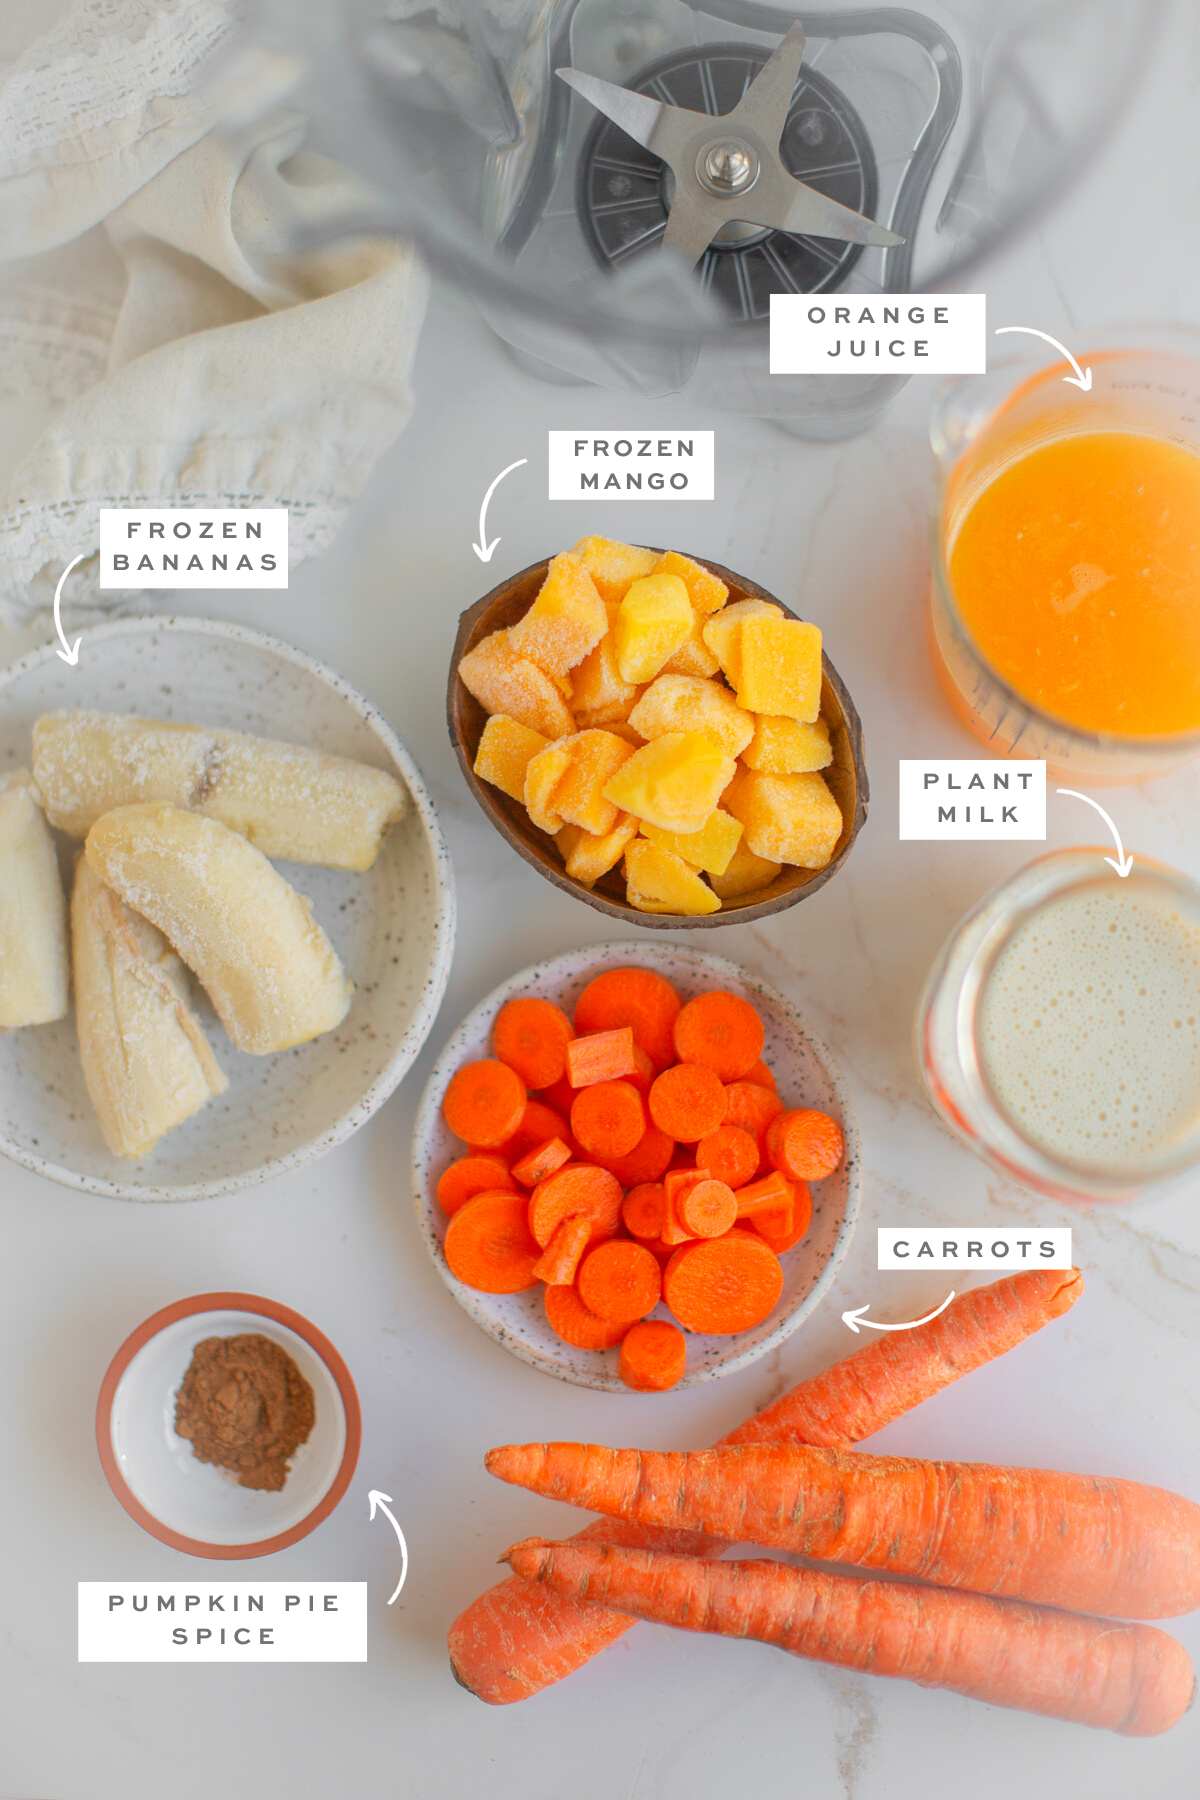 Gathered ingredients for this carrot smoothie recipe with labels.